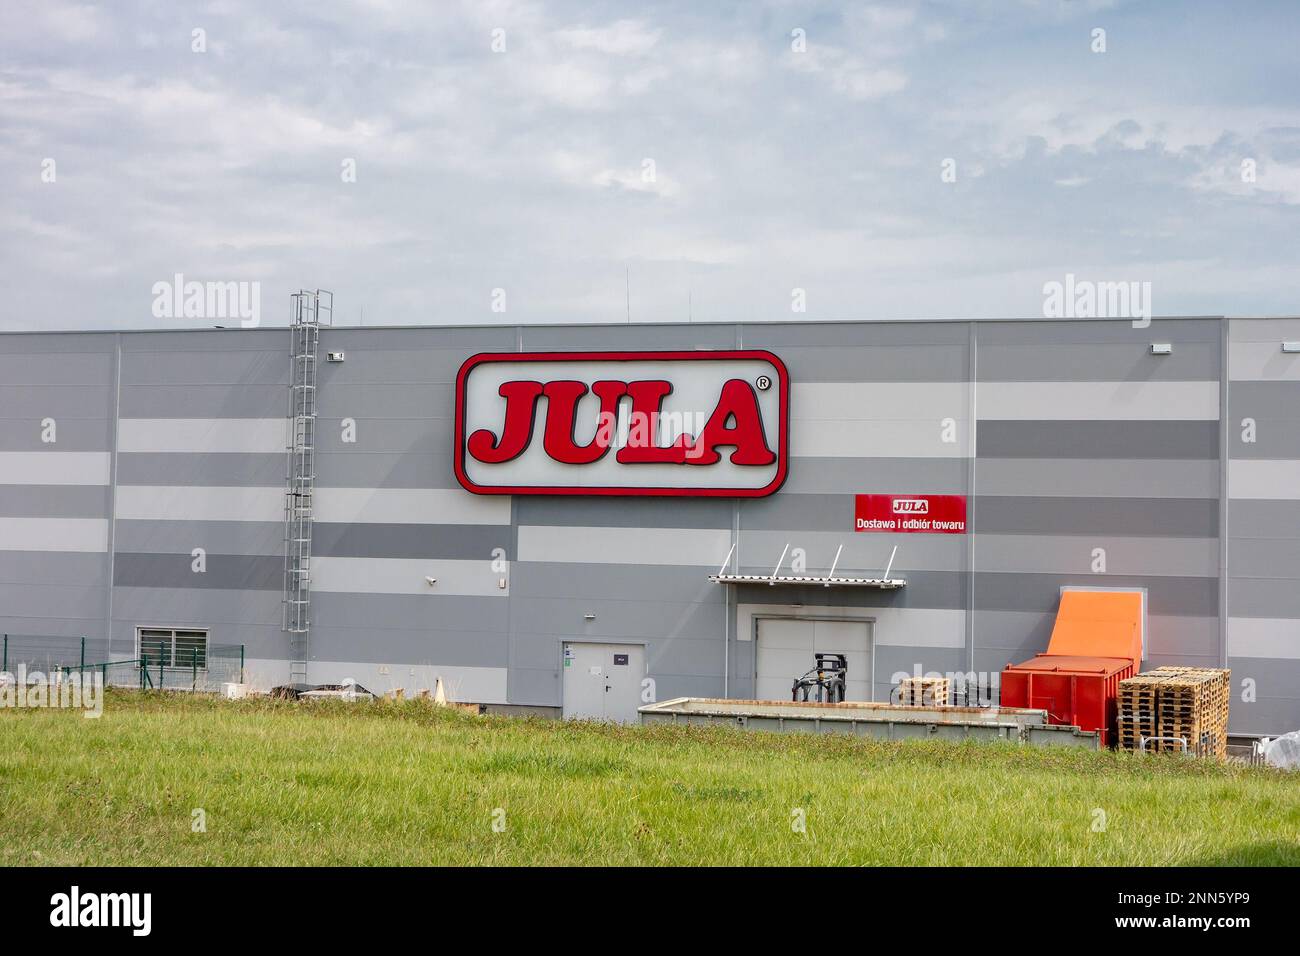 GLIWICE, POLAND - JULY 29, 2022: Jula storehouse where furniture, electronics, and appliances is sold Stock Photo